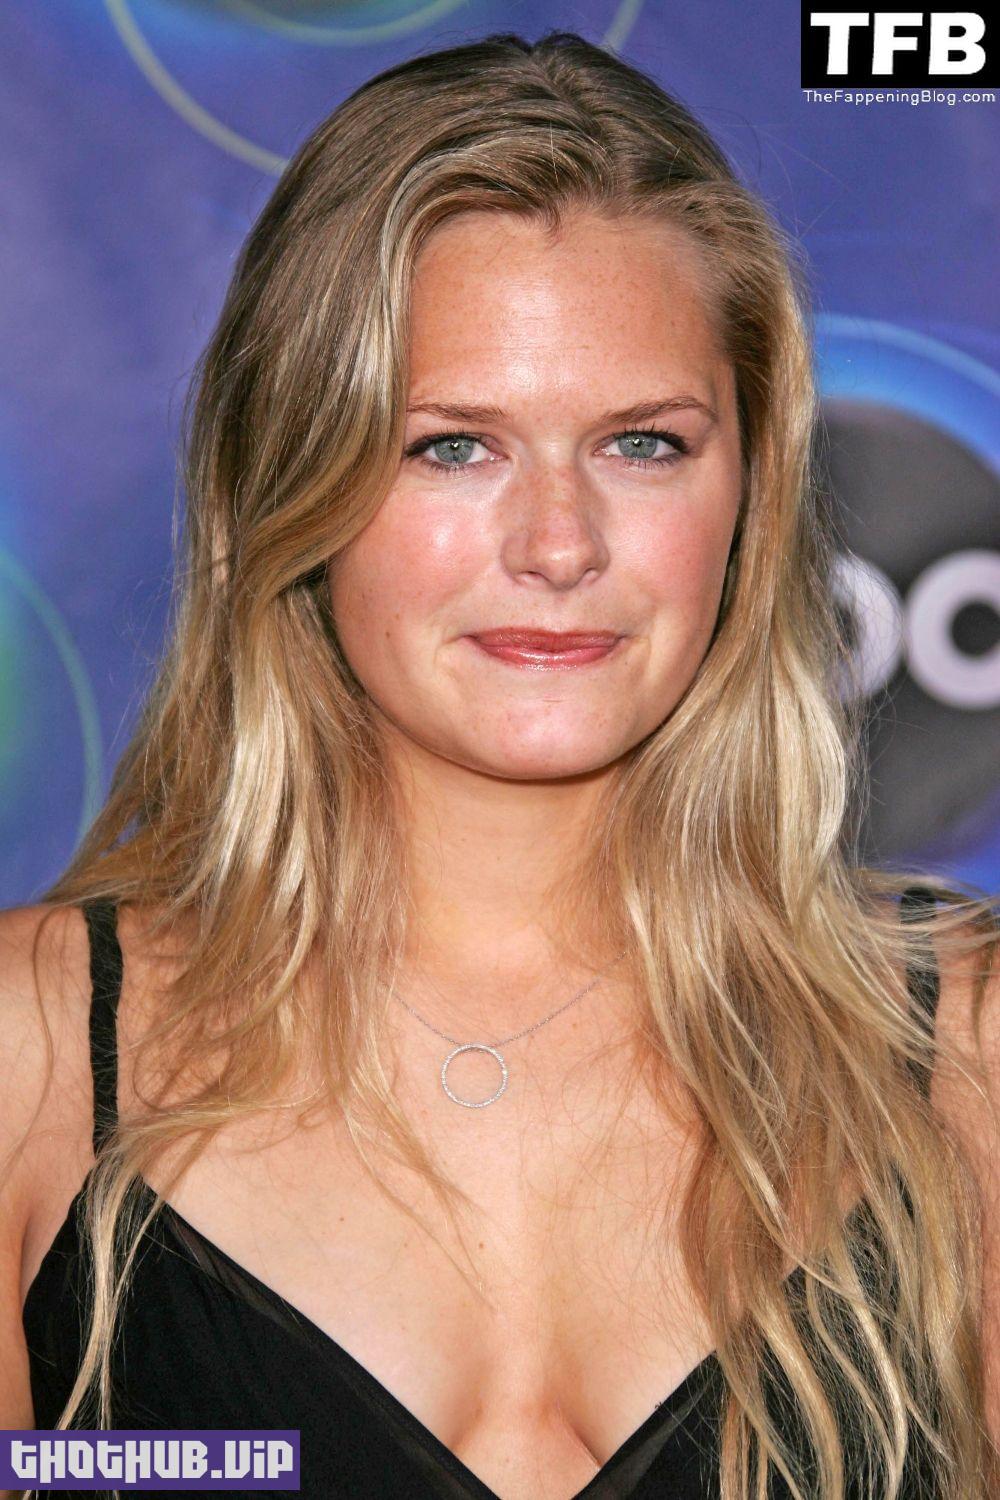 maggie lawson cleavage 406969 thefappeningblog.com